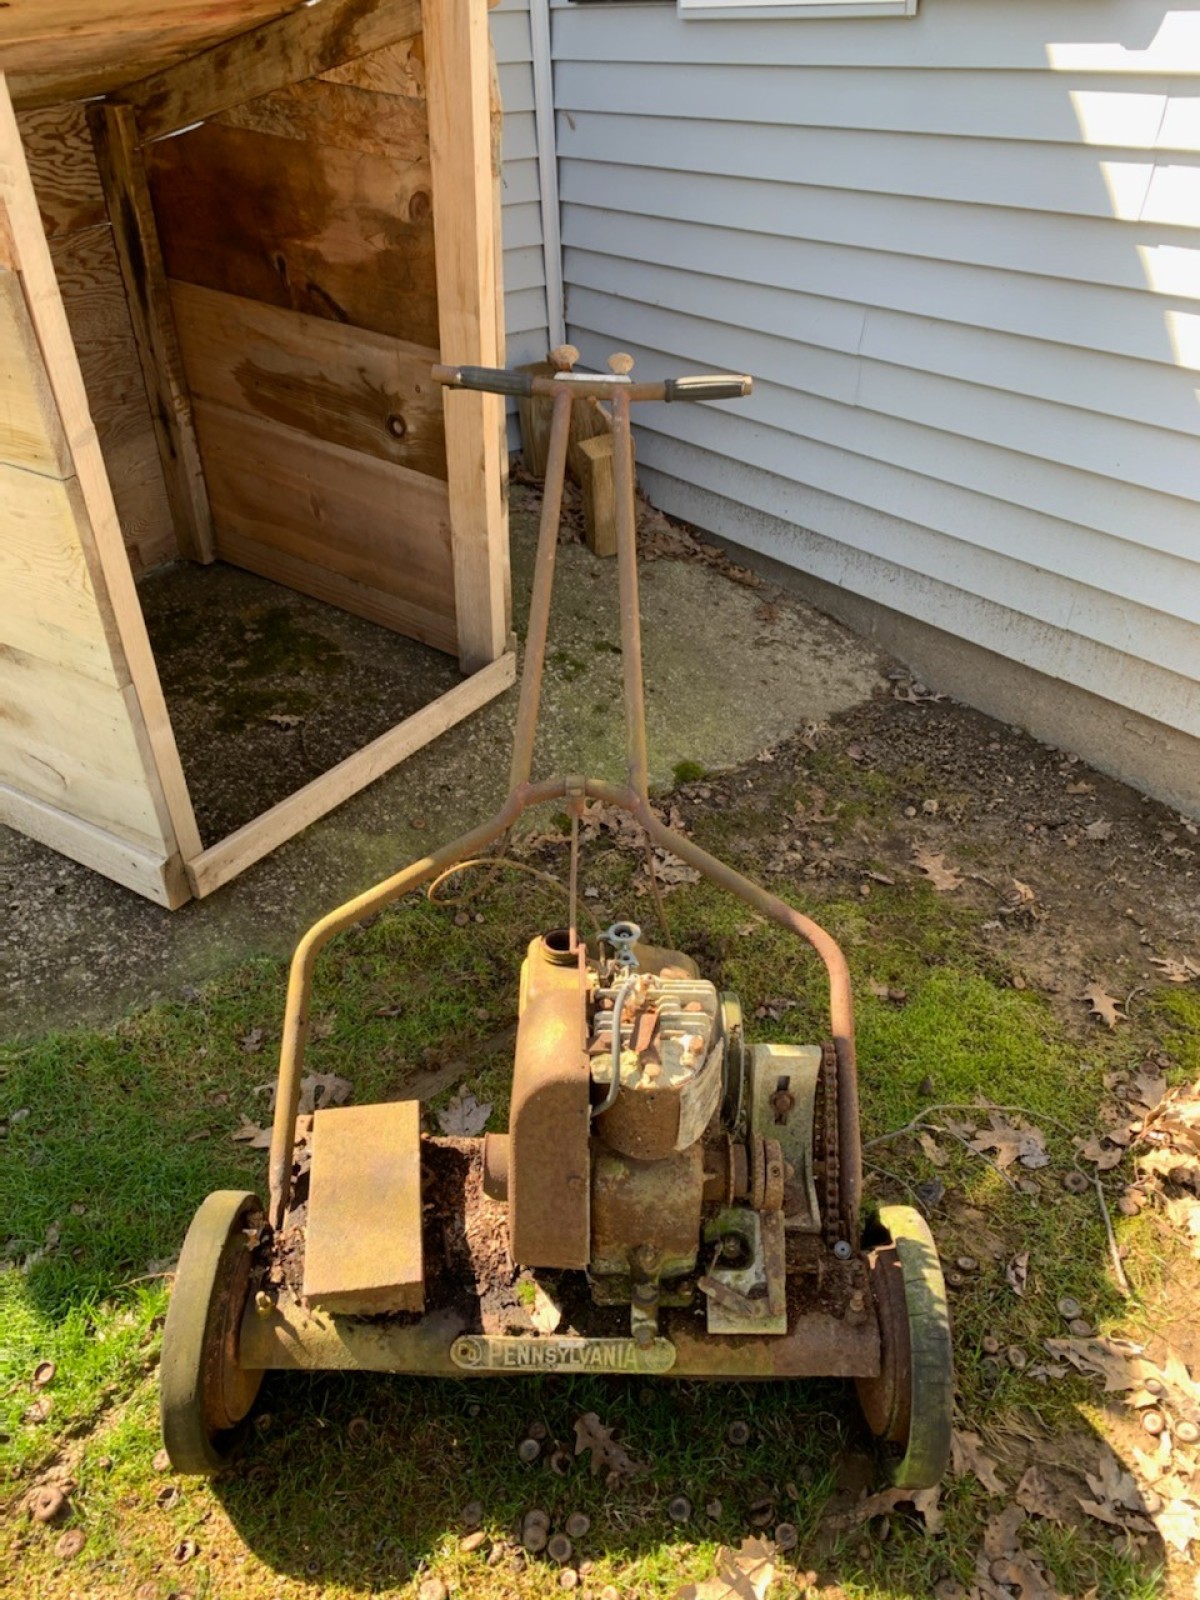 Information on a Gas Powered Pennsylvania Reel Mower?